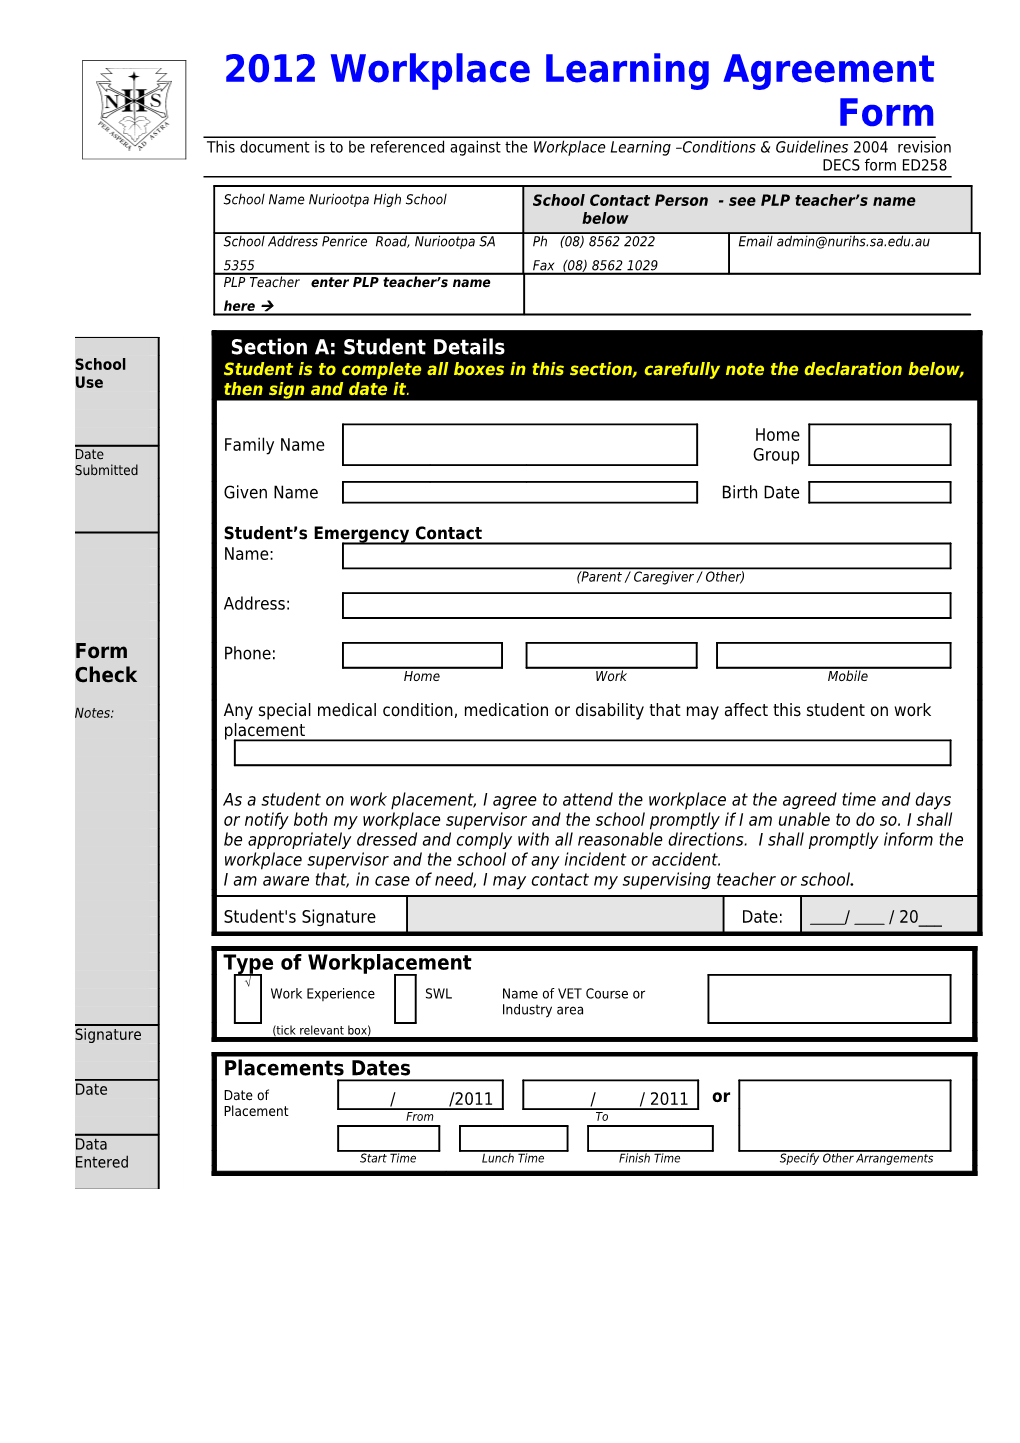 Workplace Learning Agreement Form